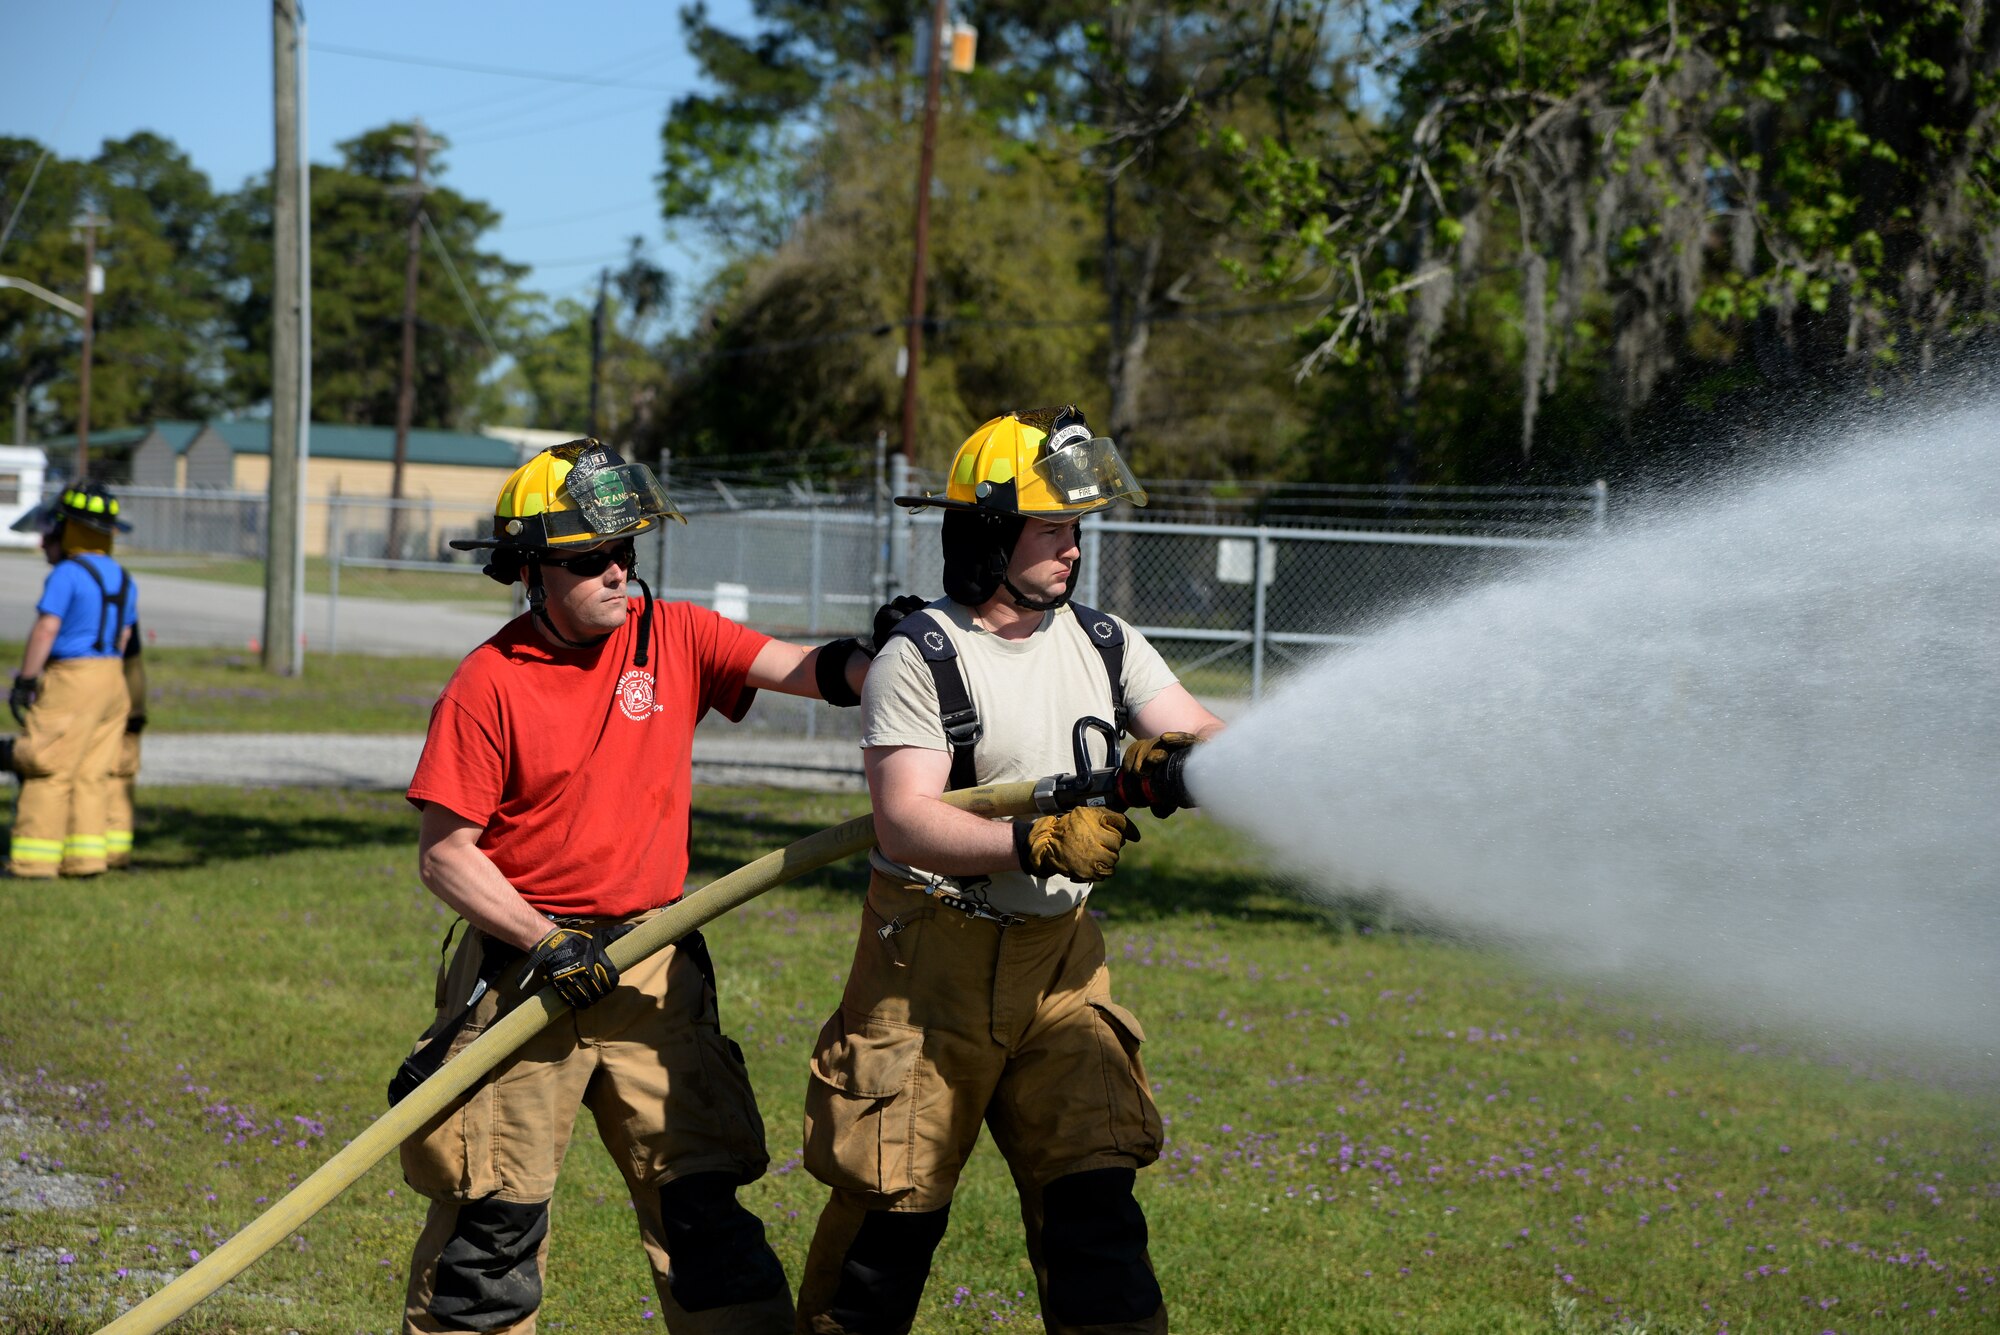 A picture of Airman 1st Class Joseph Frederickson (right) of the 143rd Airlift Wing, Rhode Island Air National Guard, and Staff Sgt. Paul Botting of the 158th Fighter Wing, Vermont Air National Guard conducting hose operation training.